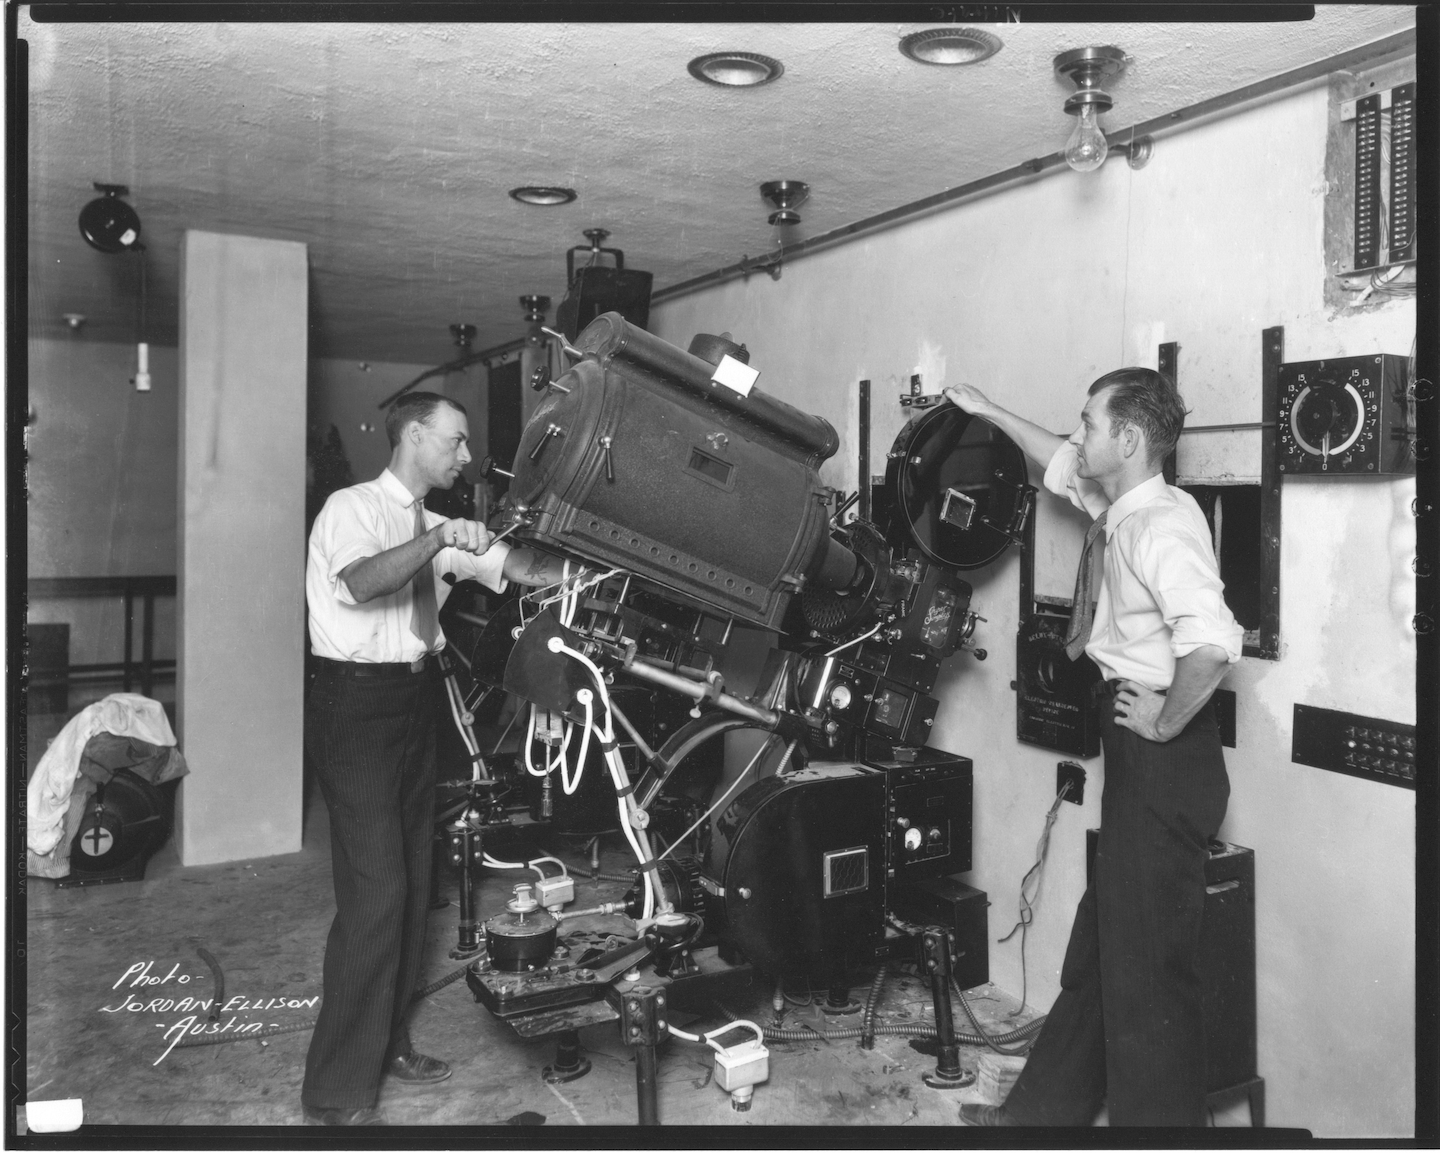 The projection booth at the Paramount Theatre during the 1930s